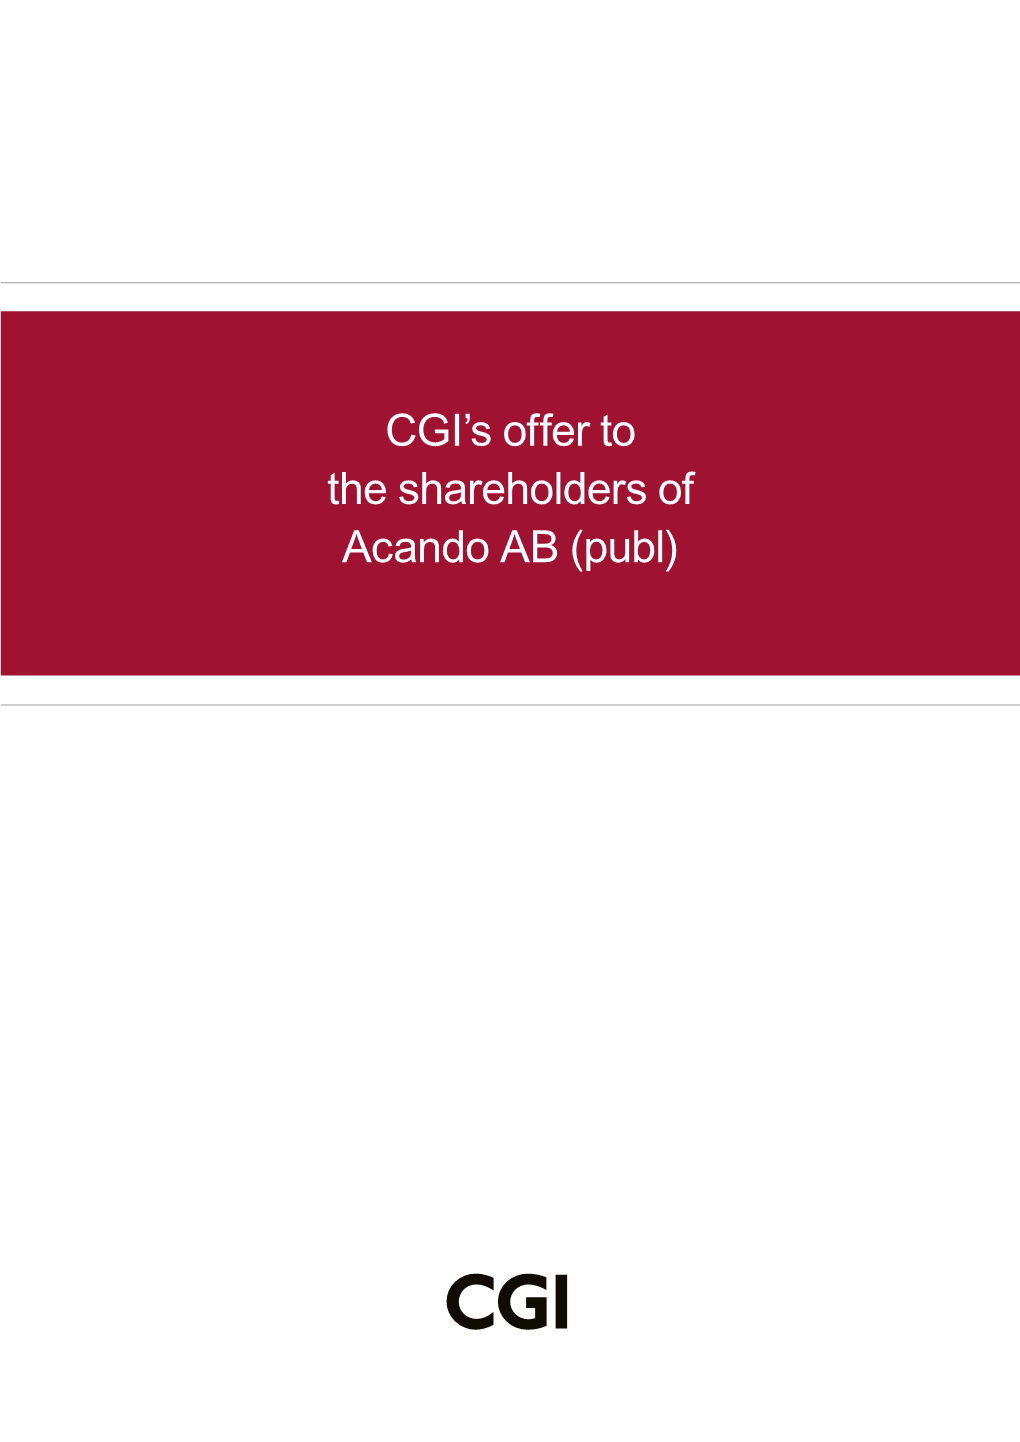 CGI's Offer to the Shareholders of Acando AB (Publ)